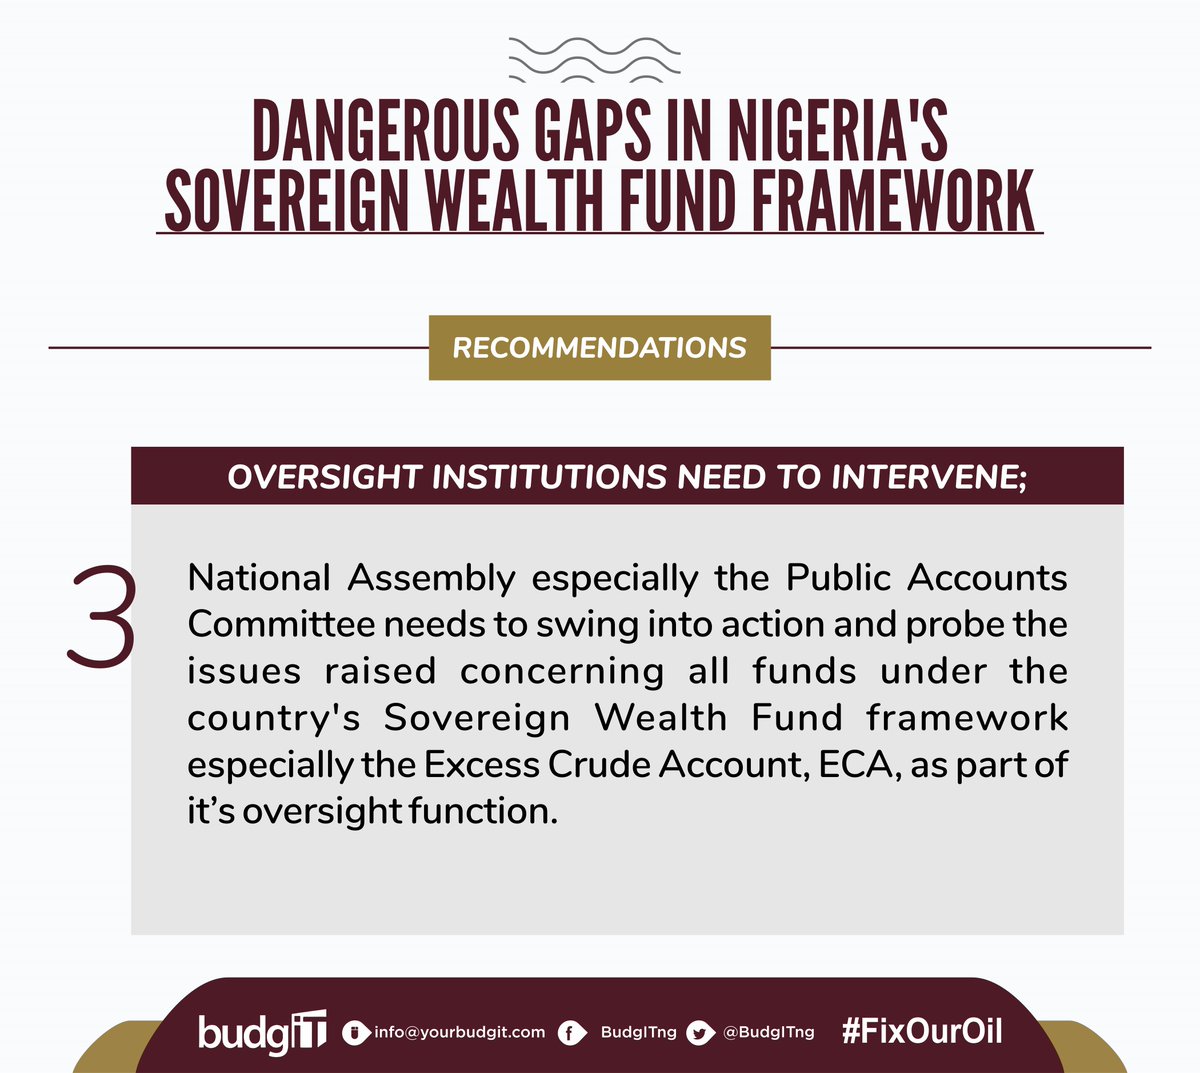 3. Oversight institutions need to intervene;  @nassnigeria especially the Public Accounts Committee needs to intervene and probe all spendings from the Sovereign Wealth Fund framework especially the Excess Crude Account, ECA, as part of its oversight function. #FixOurOil